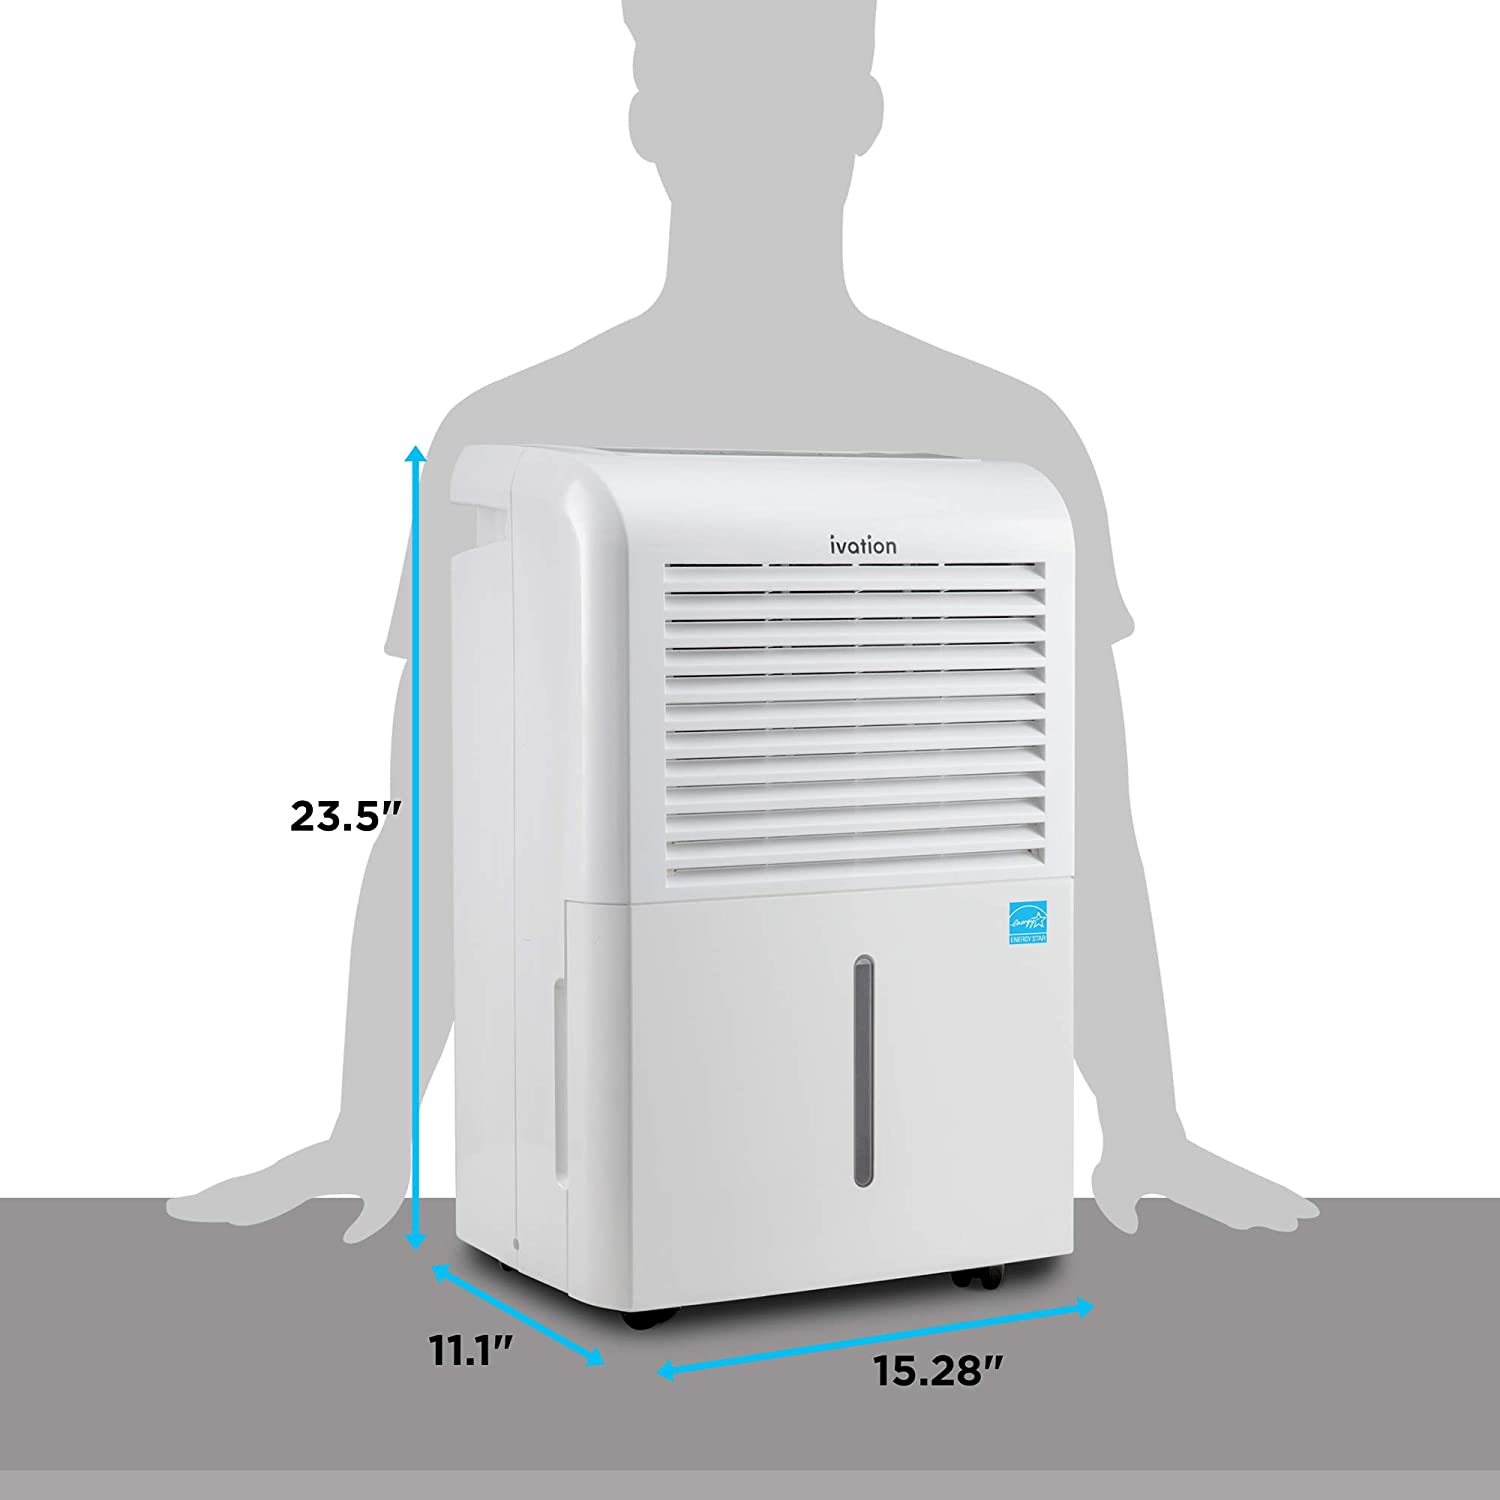  Ivation 4,500 Sq Ft Energy Star Dehumidifier with Pump Specs